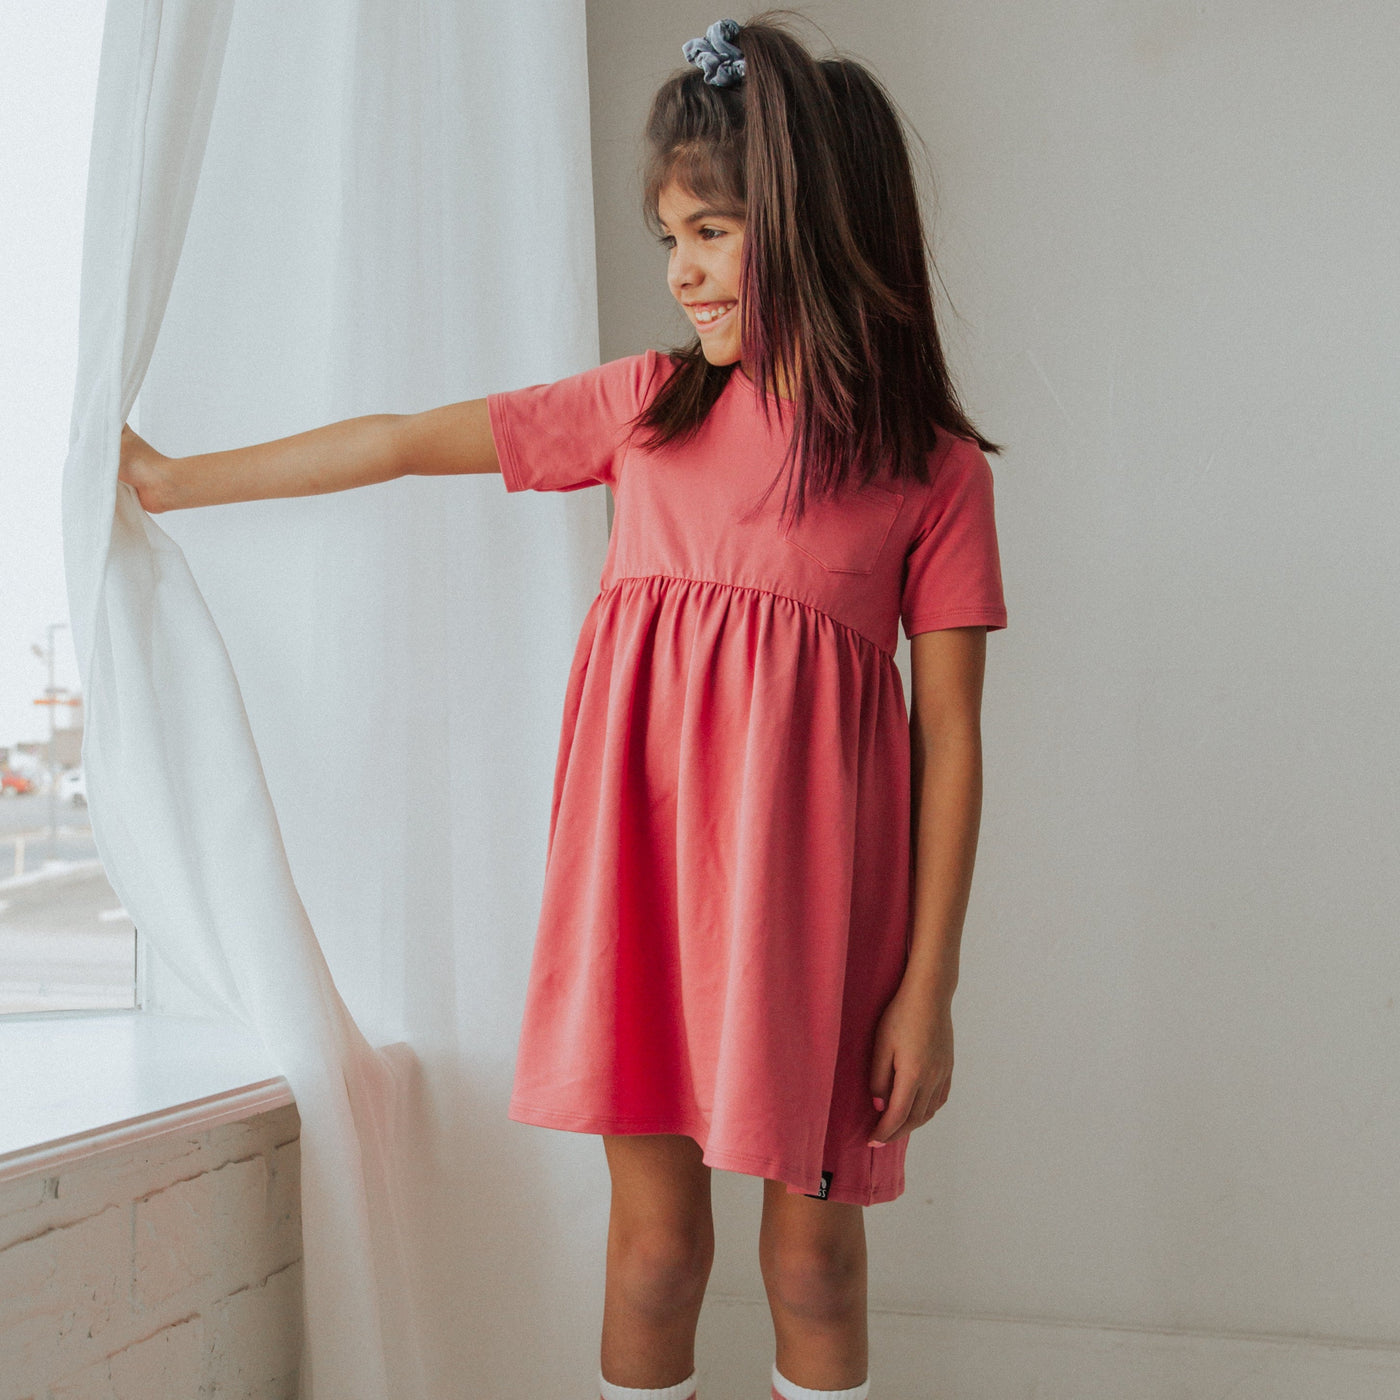 Essentials Short Sleeve with Chest Pocket Dress - 'Hot Pink'